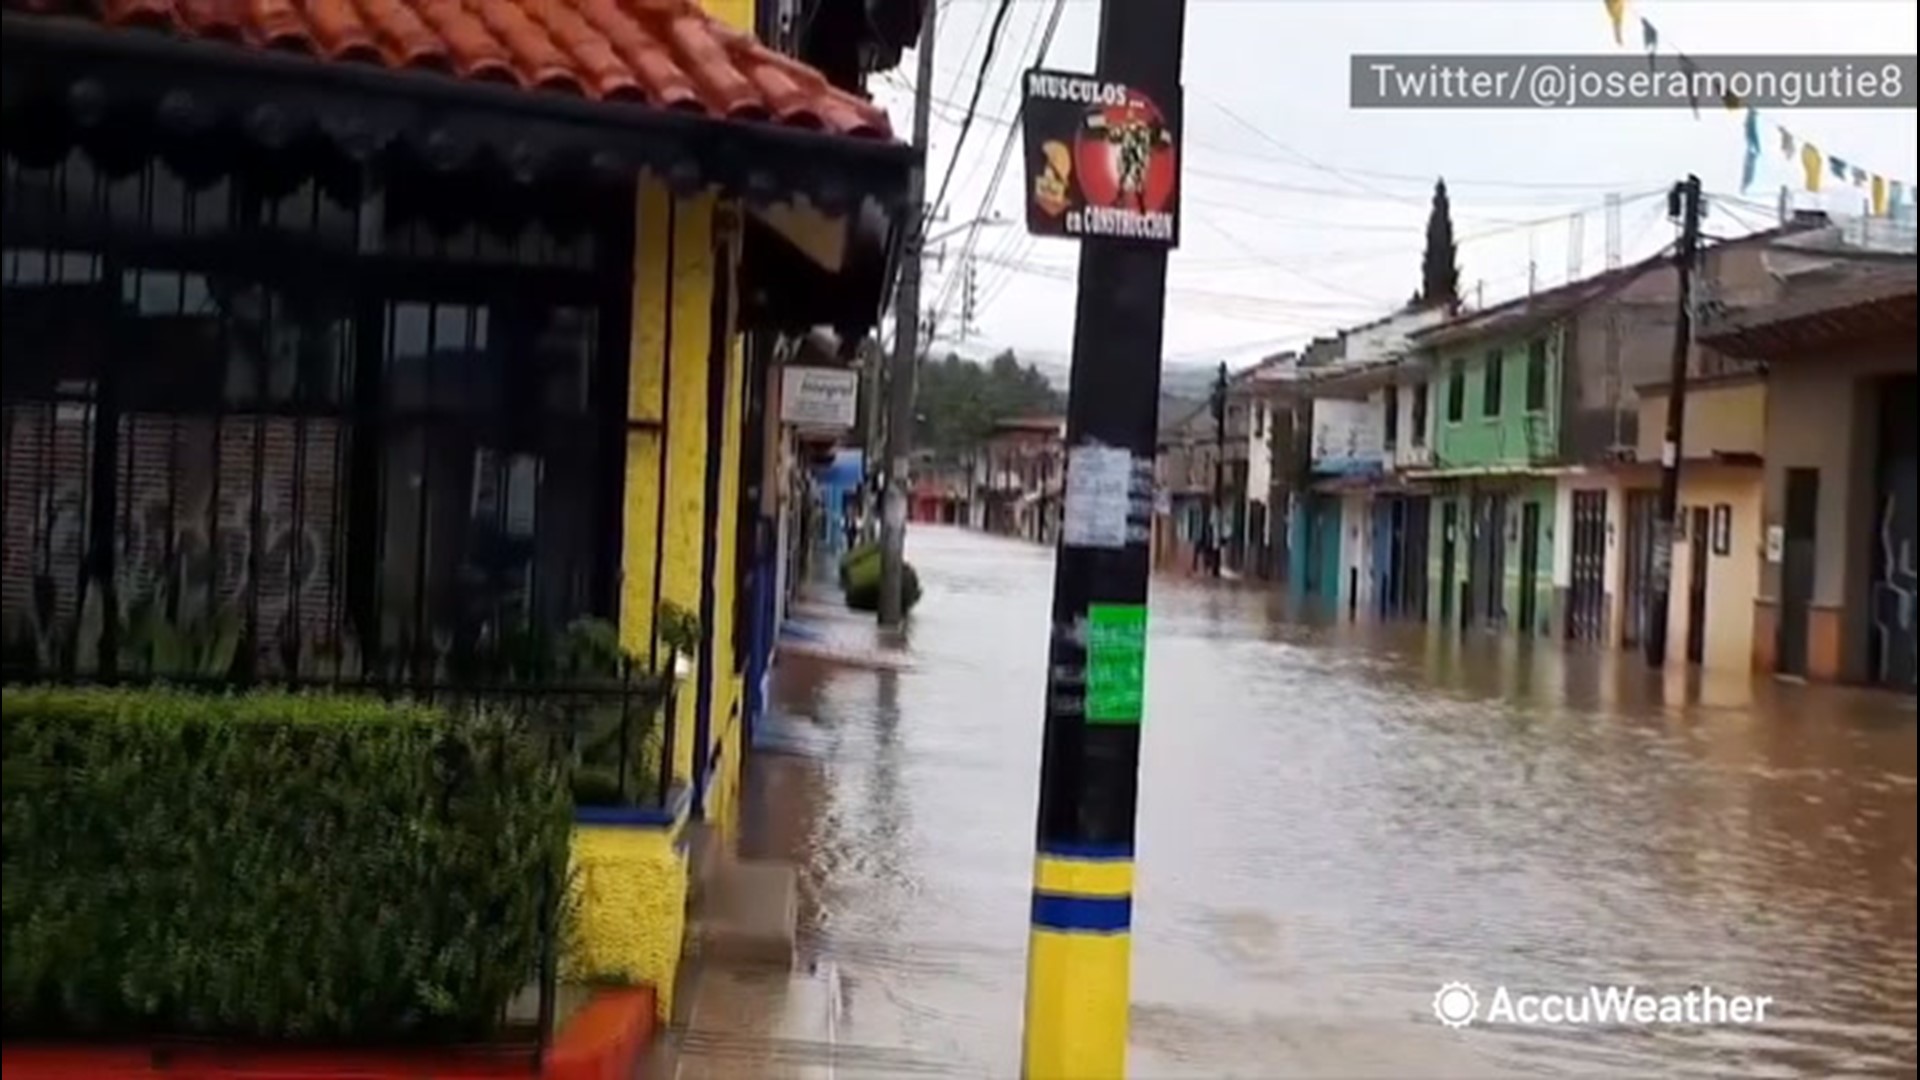 Streets were buried underwater as floodwaters sweep through San Cristobal de las Casas, Mexico, on June 4.